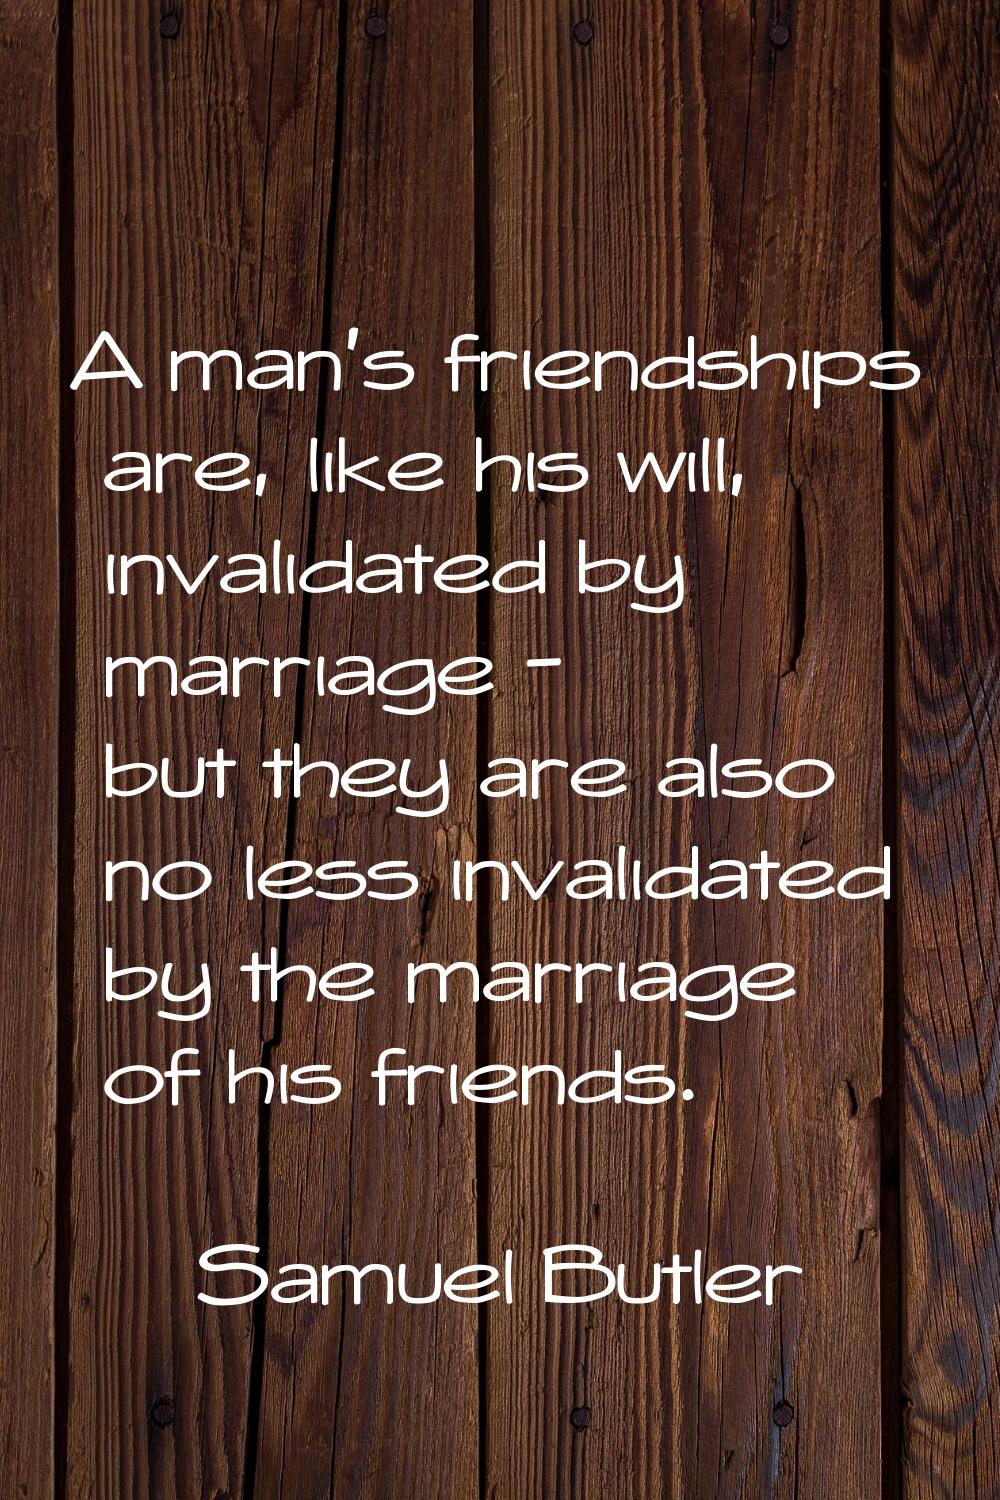 A man's friendships are, like his will, invalidated by marriage - but they are also no less invalid